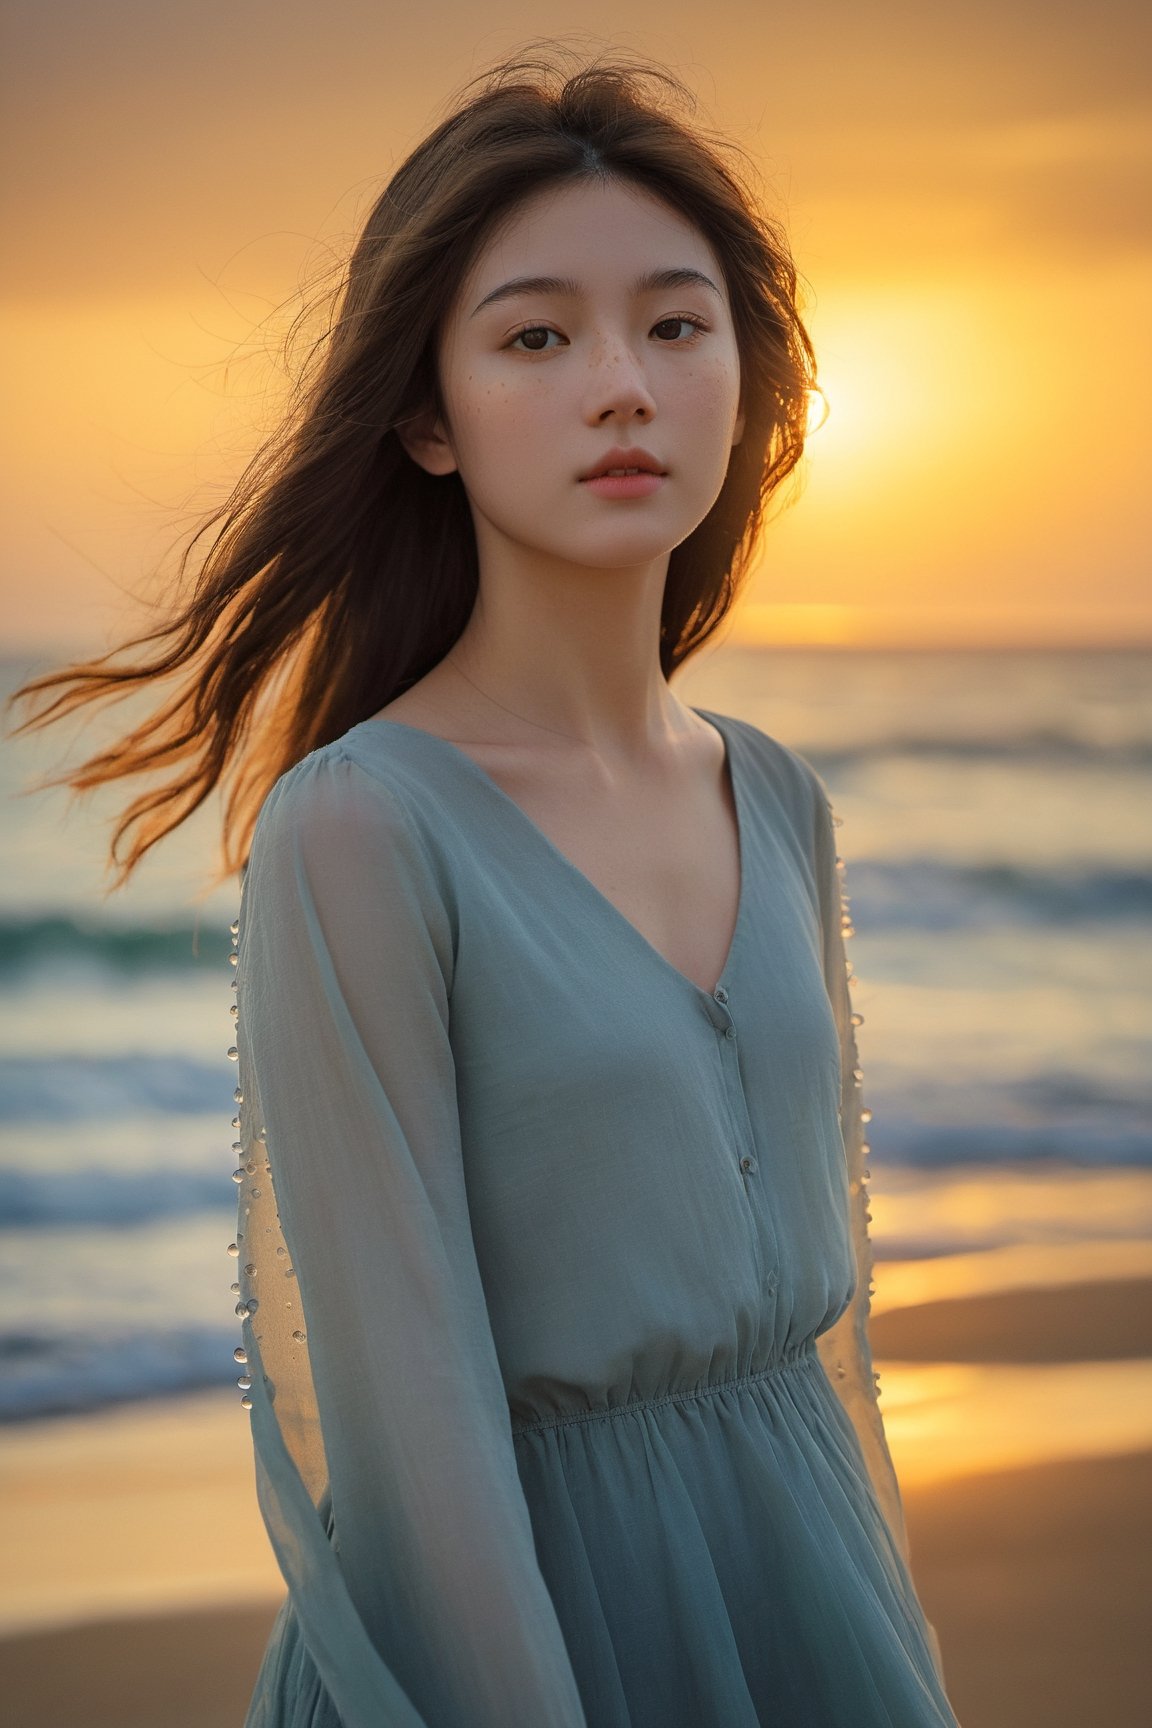 The upper body of a young girl is framed against the breathtaking backdrop of the vast sea. The cool sea breeze gently tousles her hair as she stands at the water's edge, her face illuminated by the warm, golden light of the setting sun. The rhythmic sound of crashing waves and the scent of salt in the air create a serene and tranquil atmosphere. The camera perspective captures her from a low angle, highlighting her sense of wonder and connection to the sea. Every detail is meticulously rendered, from the droplets of water on her skin to the freckles that dot her cheeks, creating a captivating and immersive visual experience that captures the beauty and serenity of the seaside.